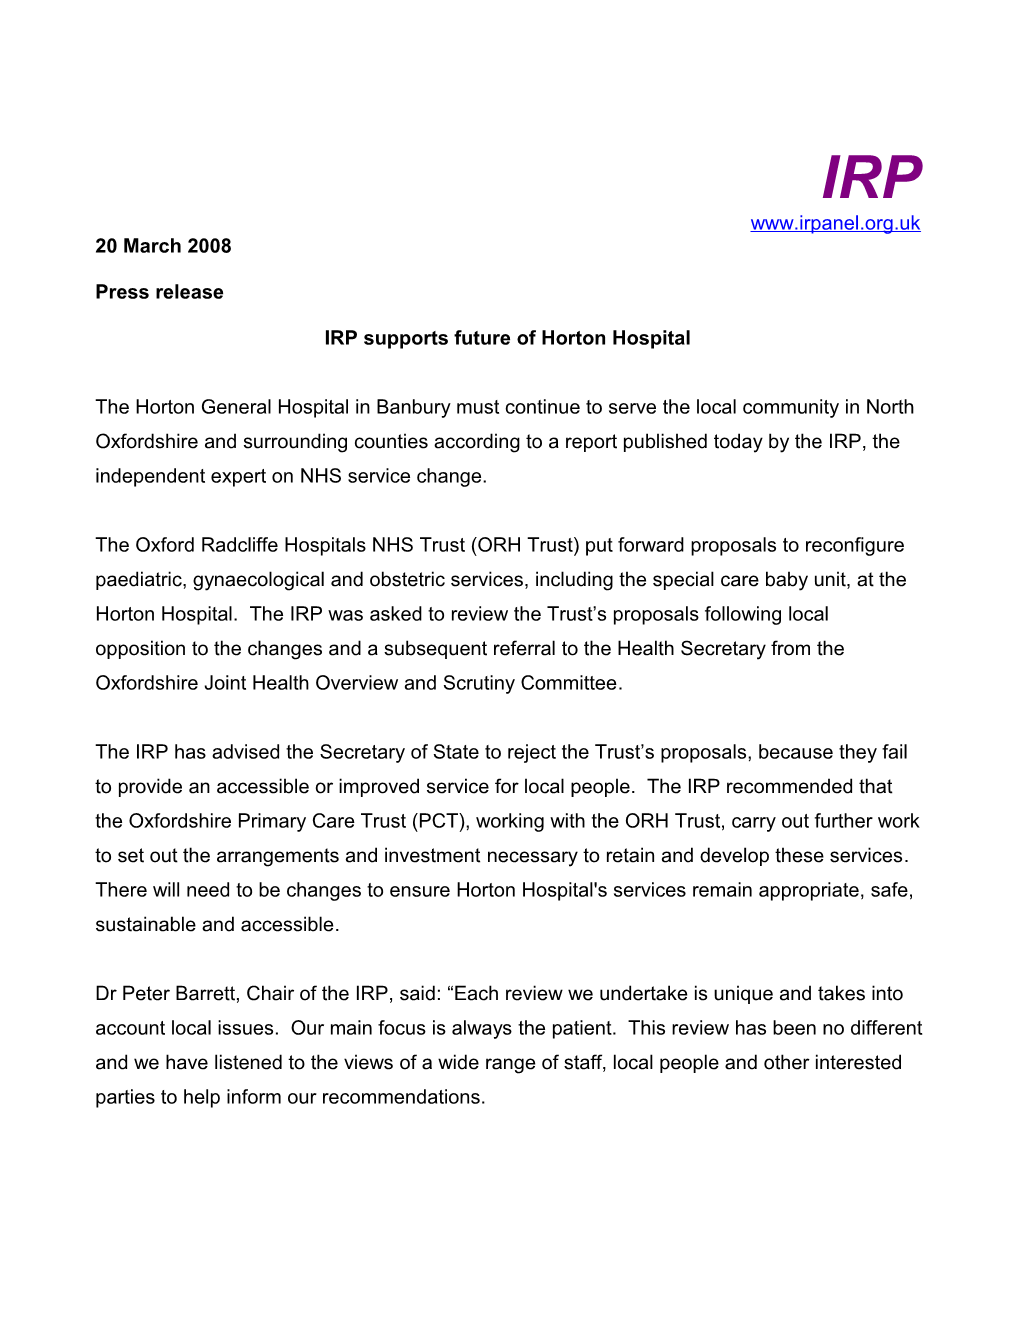 IRP Supports Future of Horton Hospital